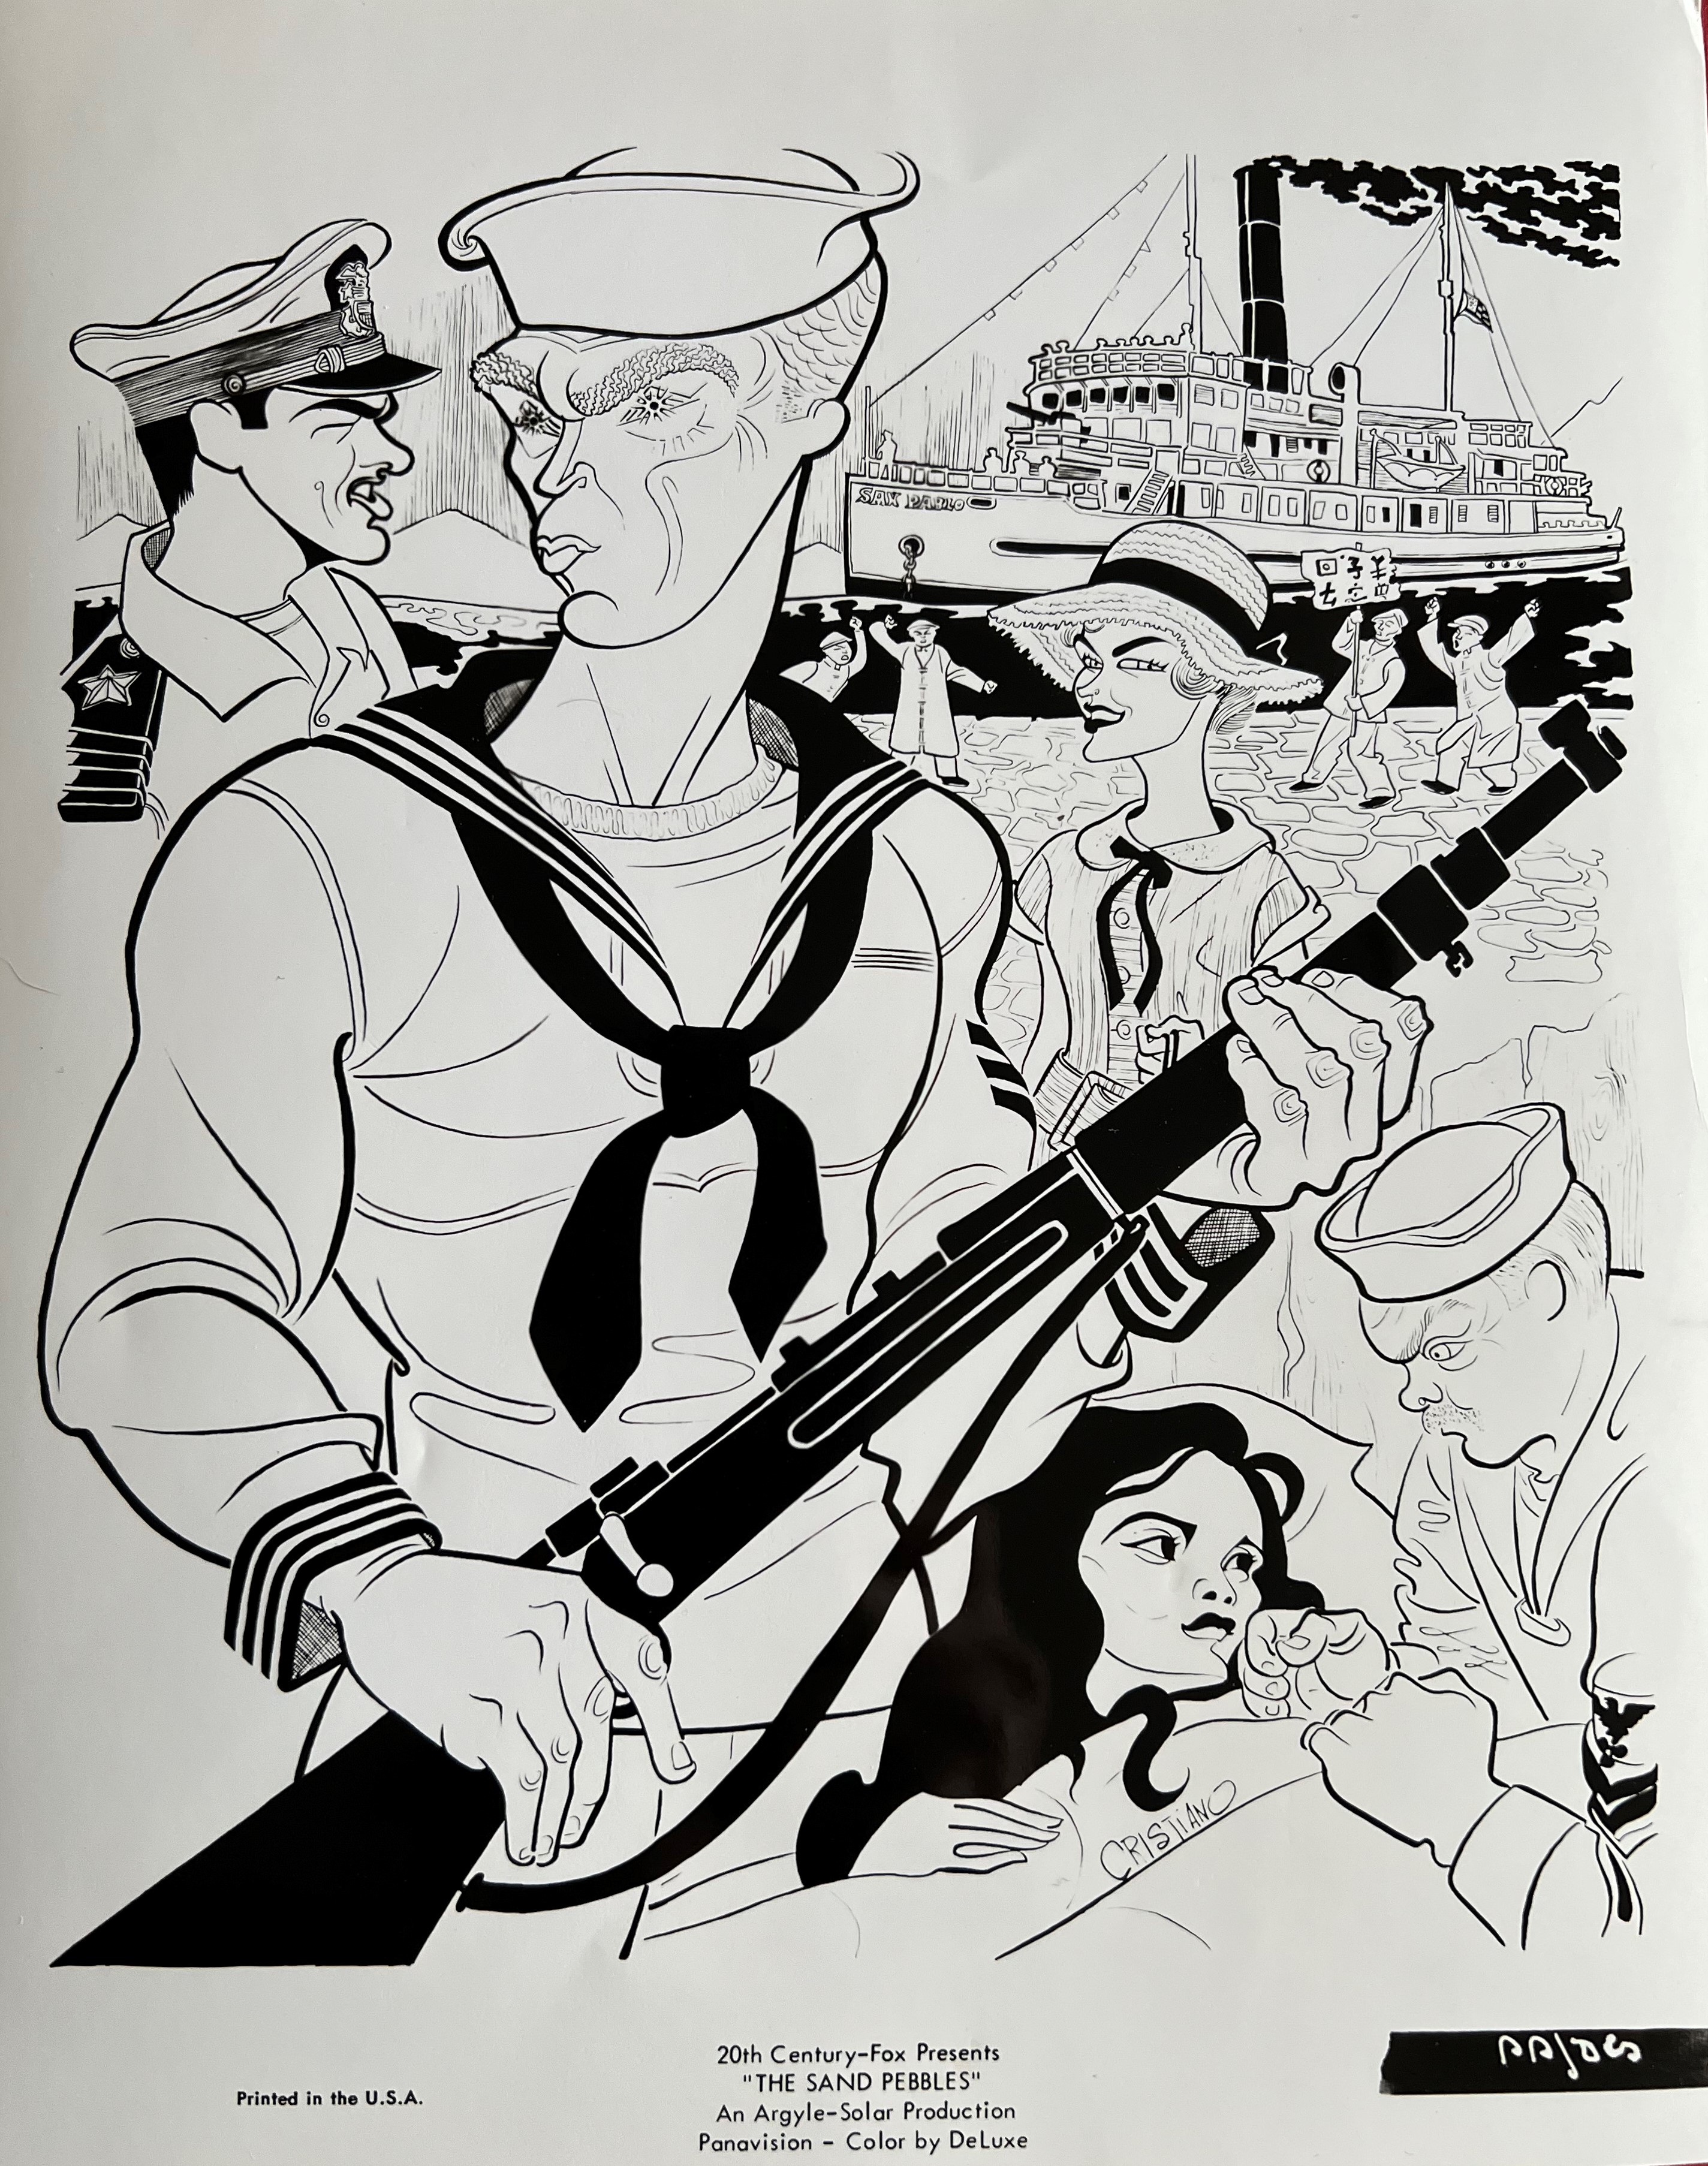 The Sand Pebbles Caricature 1A, courtesy of Steven Bryon